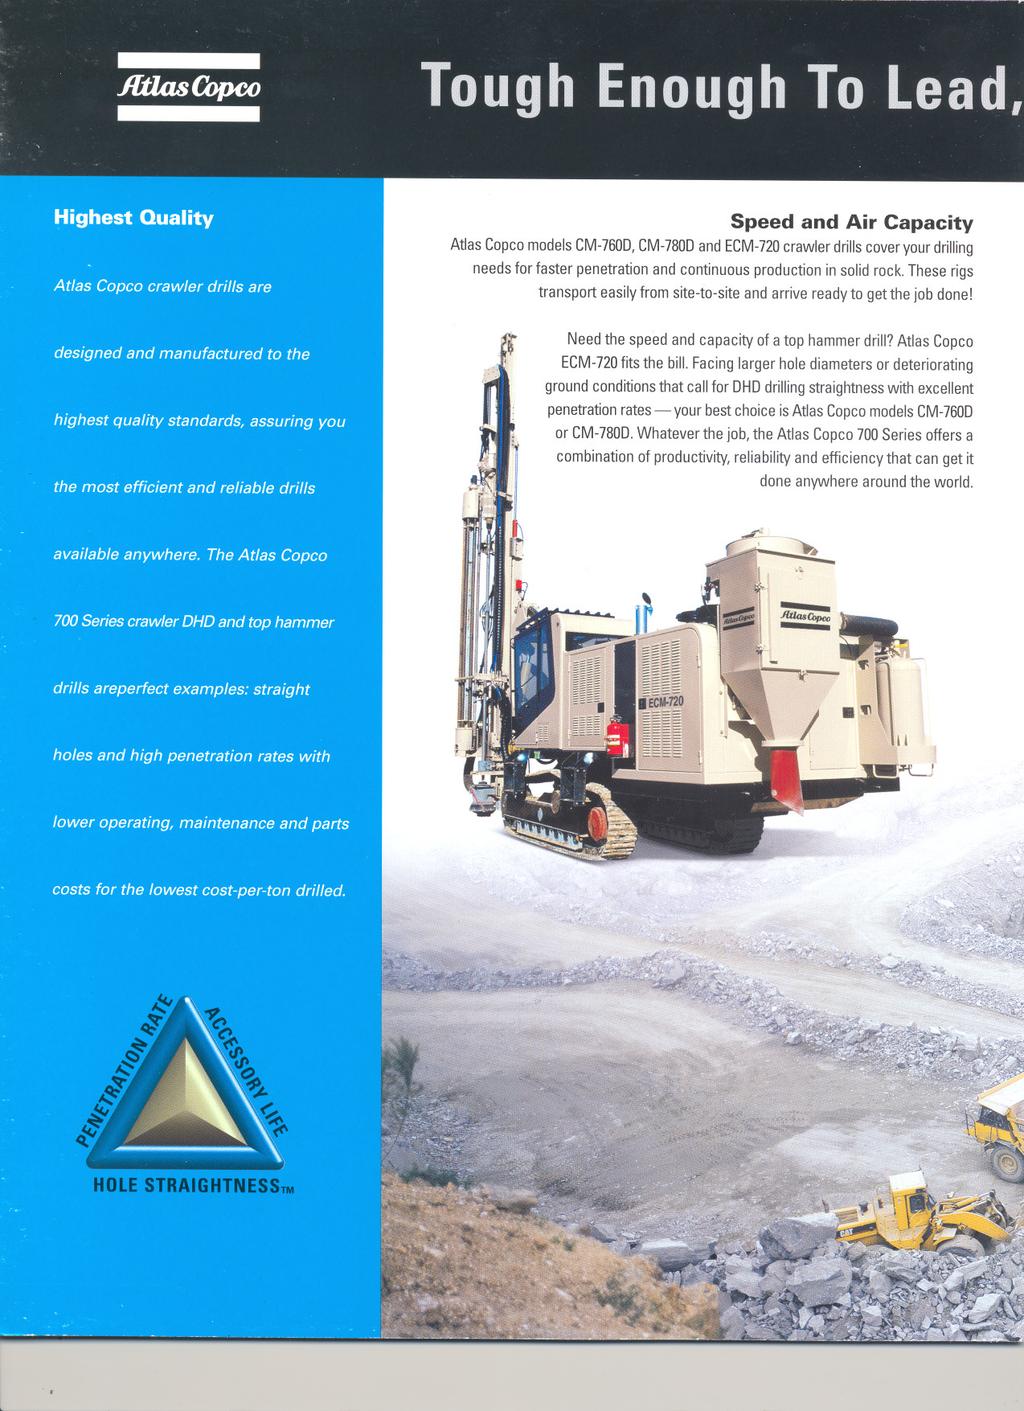 Speed and Air Capacity At/asCopcomodelsCM-760D,CM-780DandECM-720crawlerdrillscoveryour drilling needsfor faster penetrationand continuousproductionin solid rock.